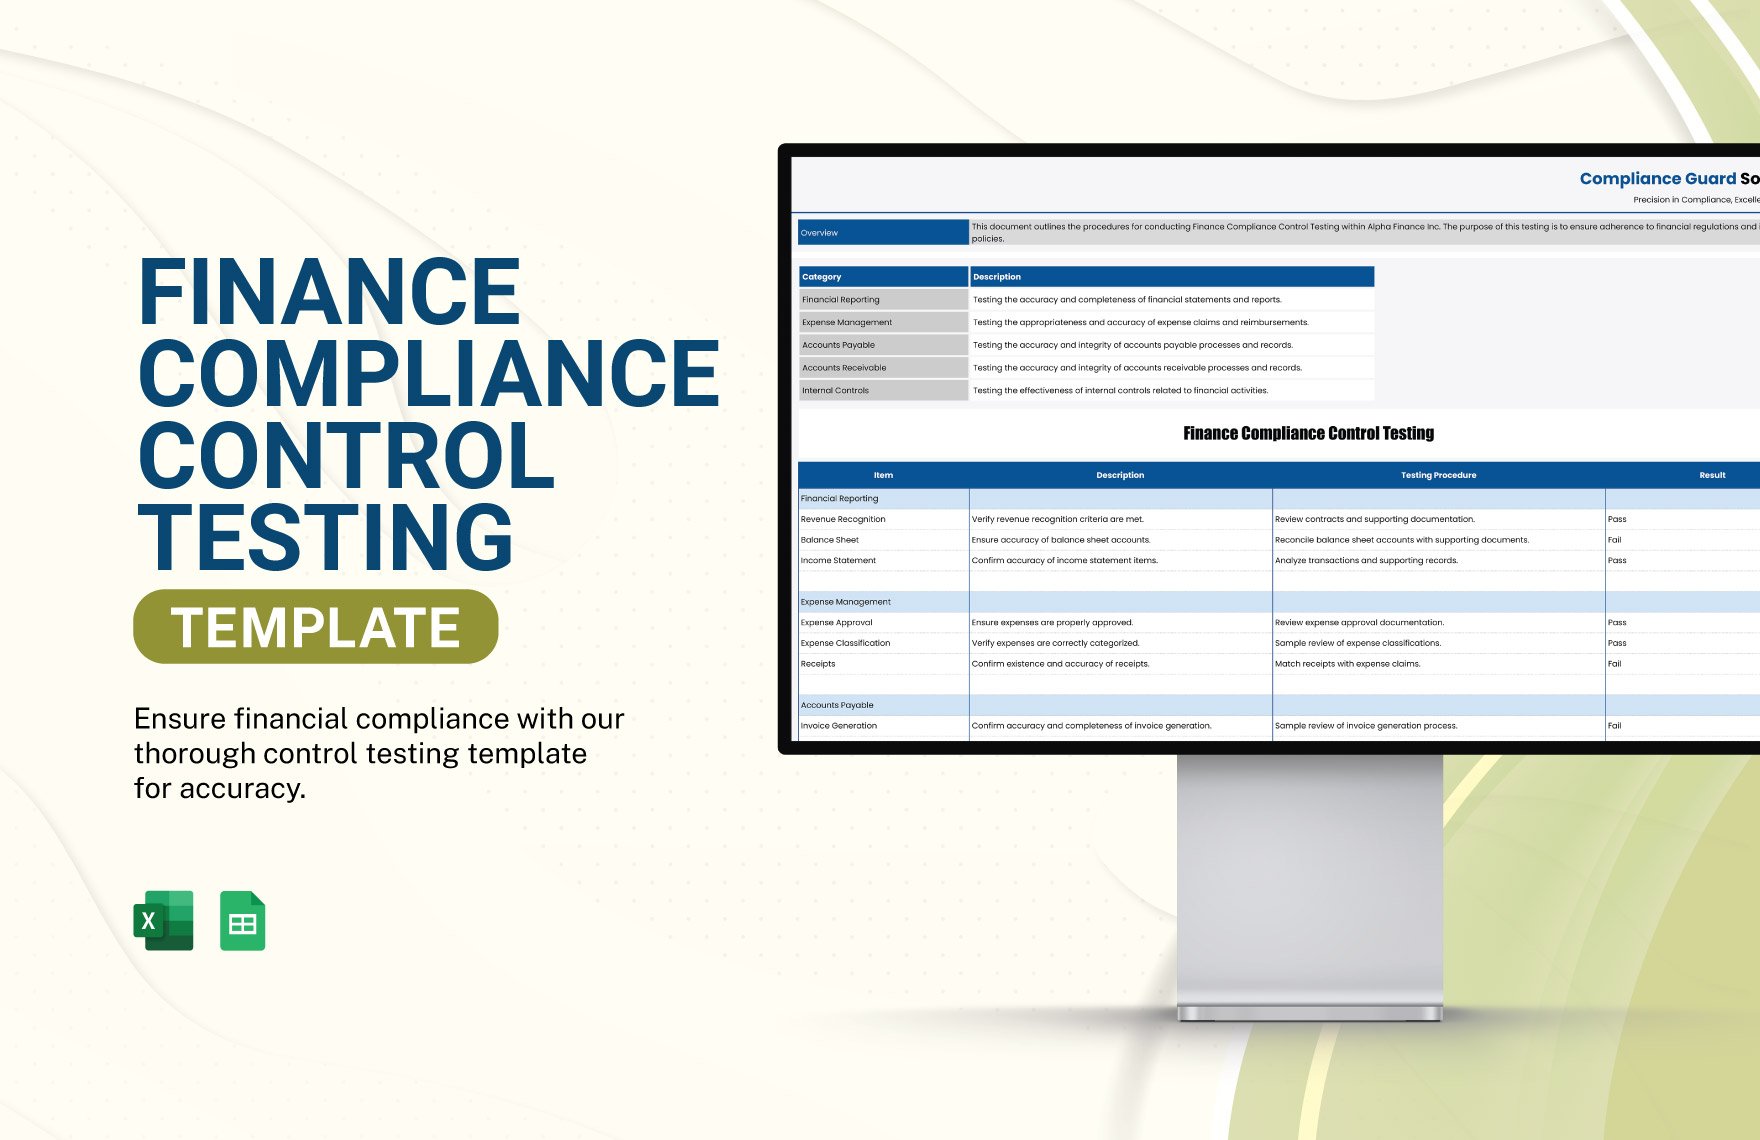 Finance Compliance Control Testing Template